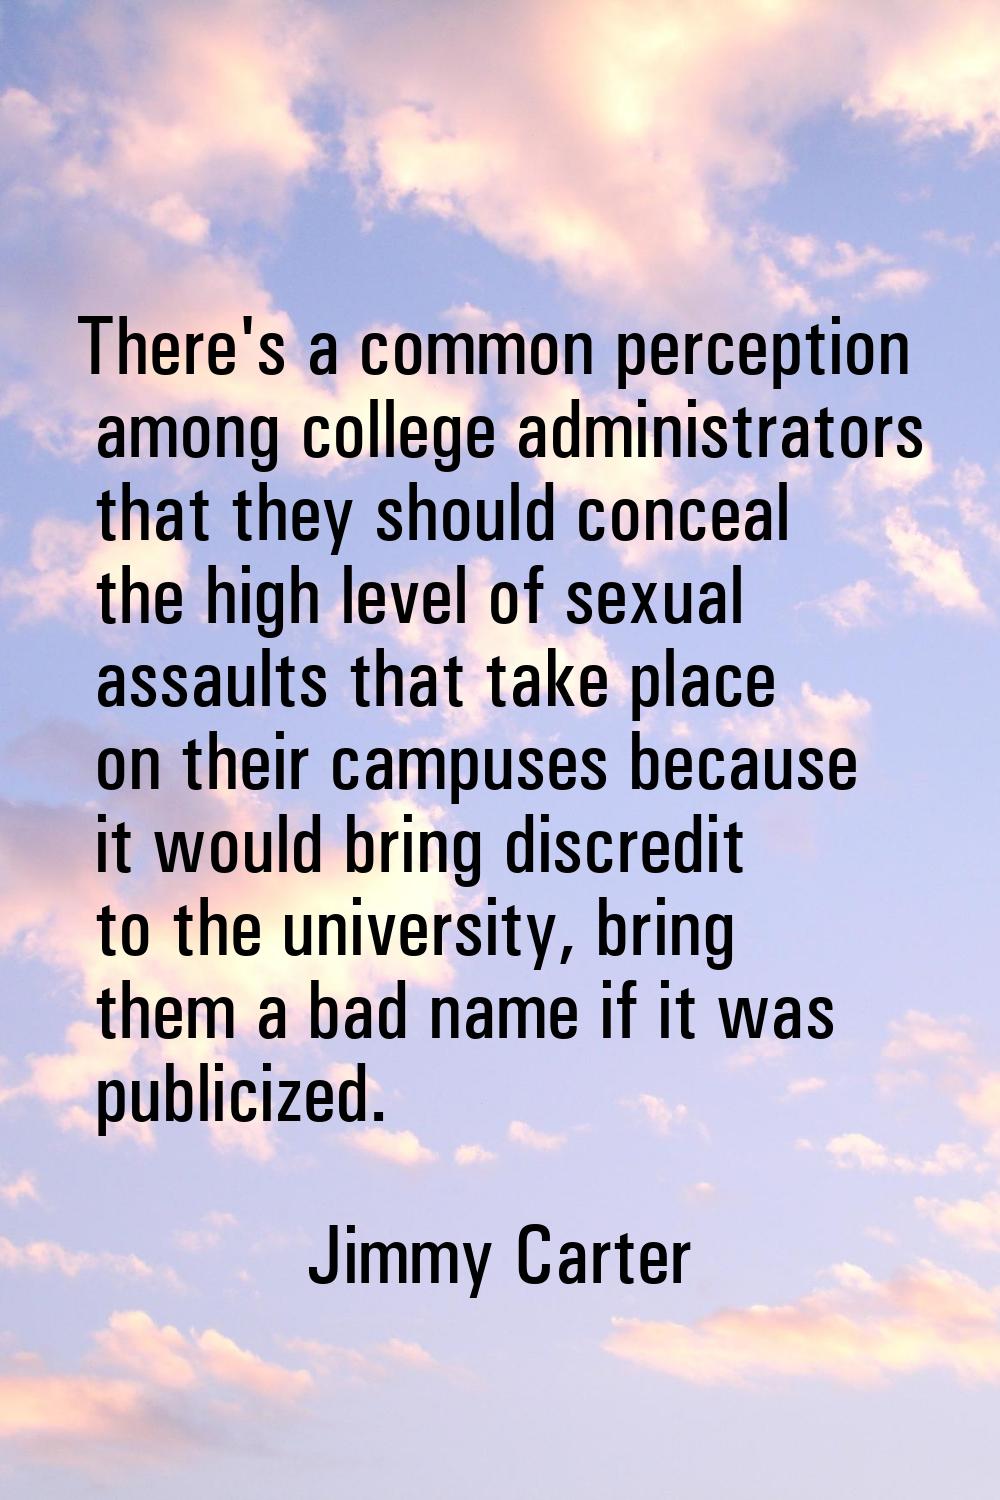 There's a common perception among college administrators that they should conceal the high level of